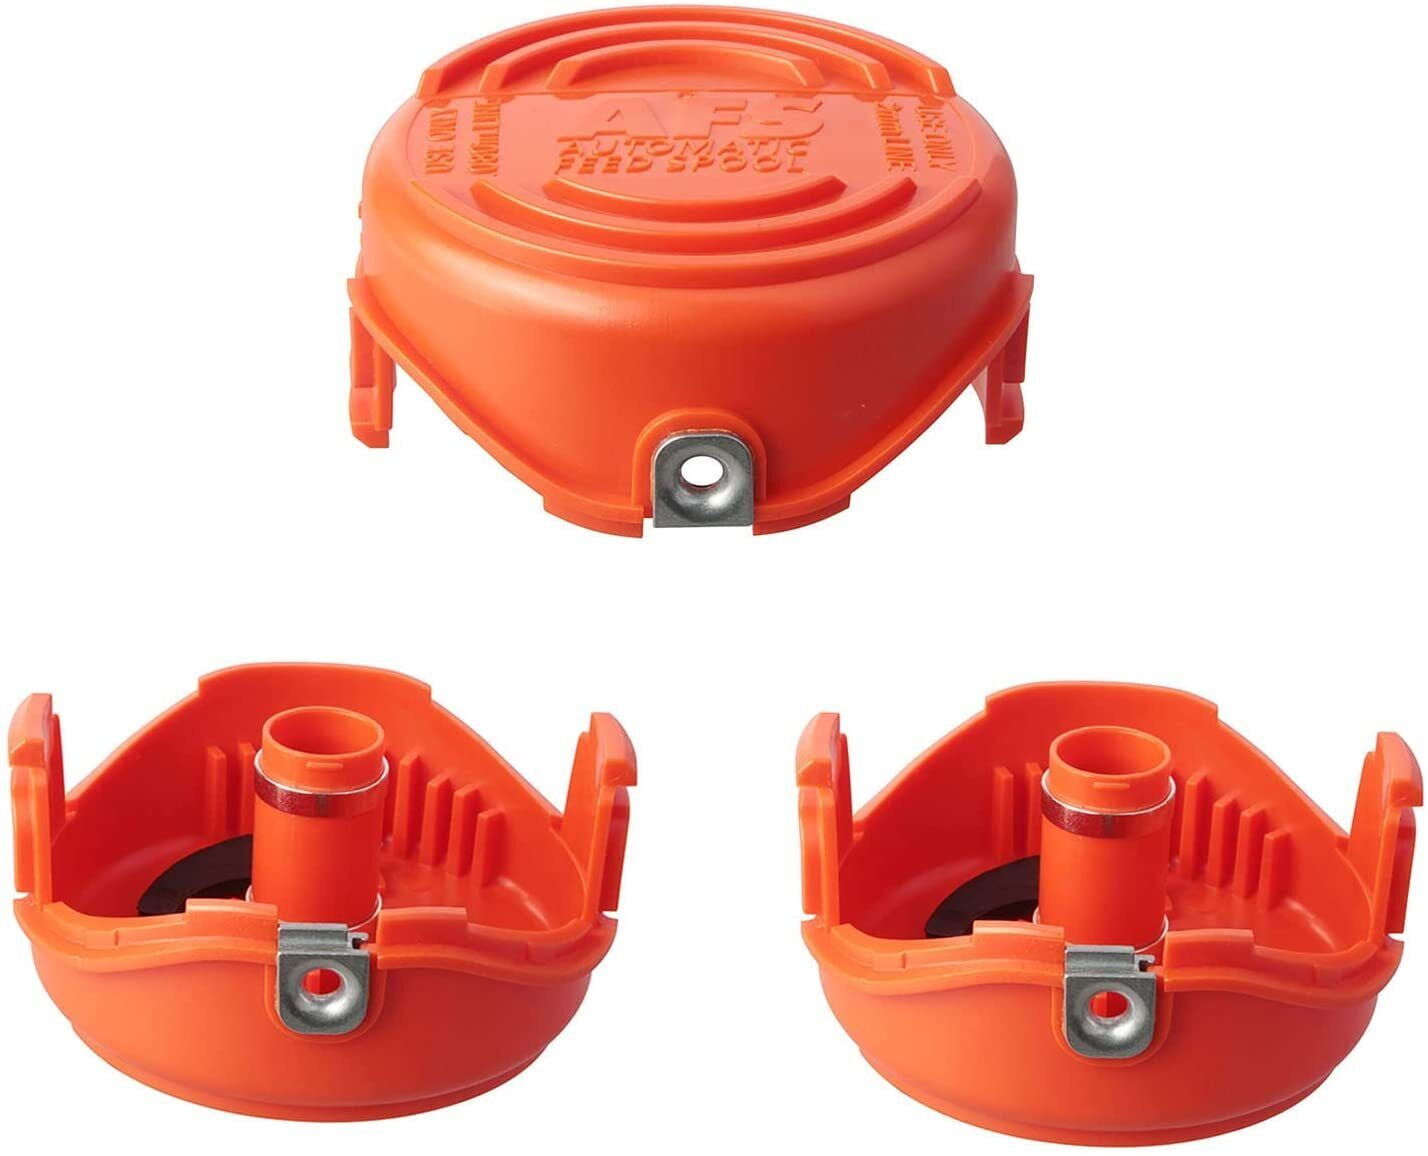 ODASHEN Trimmer Cap Covers for Black Decker SF-080 GH3000 LST540 Weed Eater  Trimmer, Replace Auto-Feed Cap Covers Part No.90583594